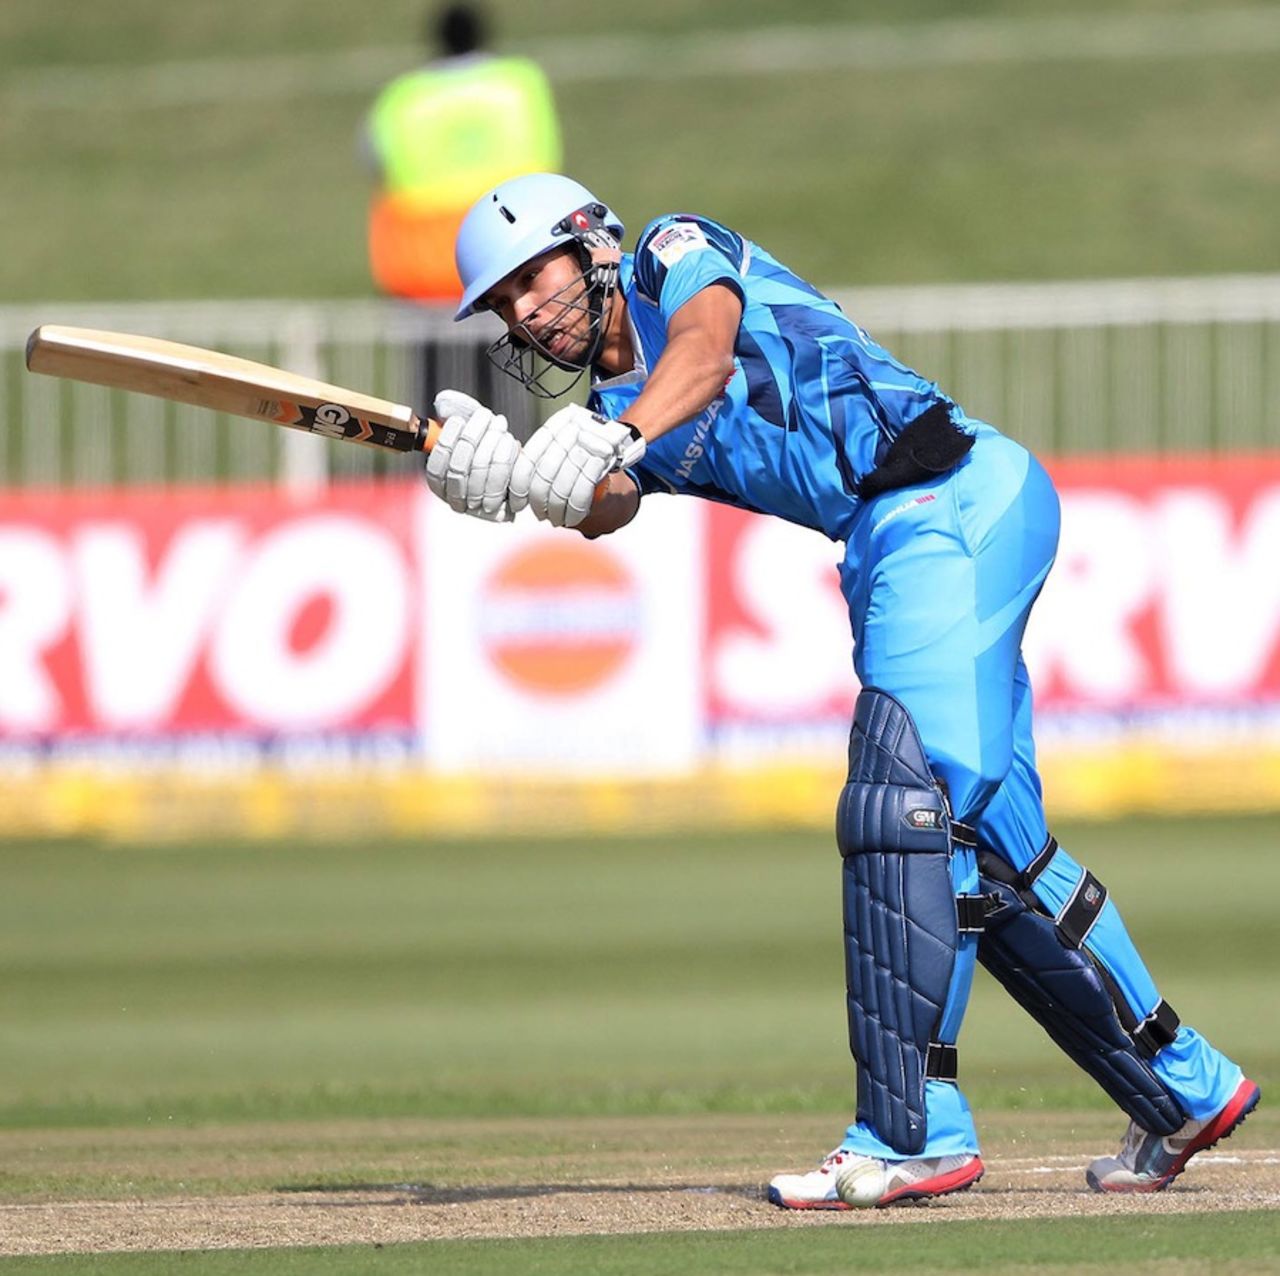 Farhaan Behardien flicks during his cameo, Auckland Aces v Titans, Group A, Champions League T20, Durban, October 17, 2012